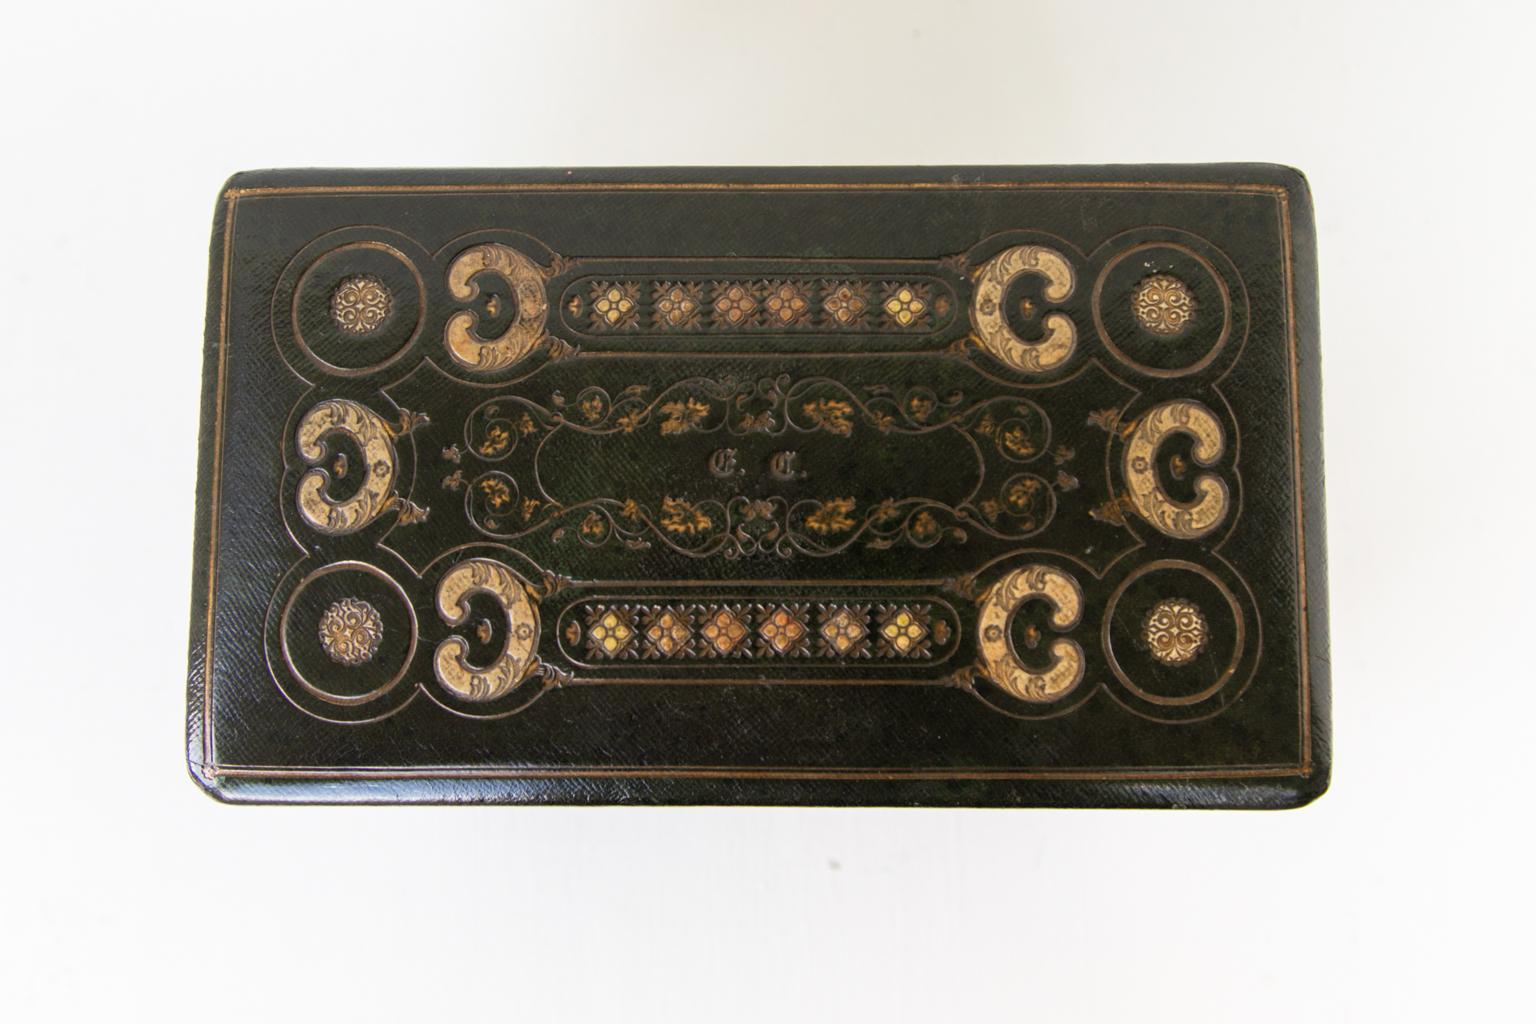 English embossed leather jewelry box, elaborately gold tooled with cartouches and arabesques on the four sides and top, raising the top reveals a removable tray with storage below. The drawer has an etched mother of pearl knob.